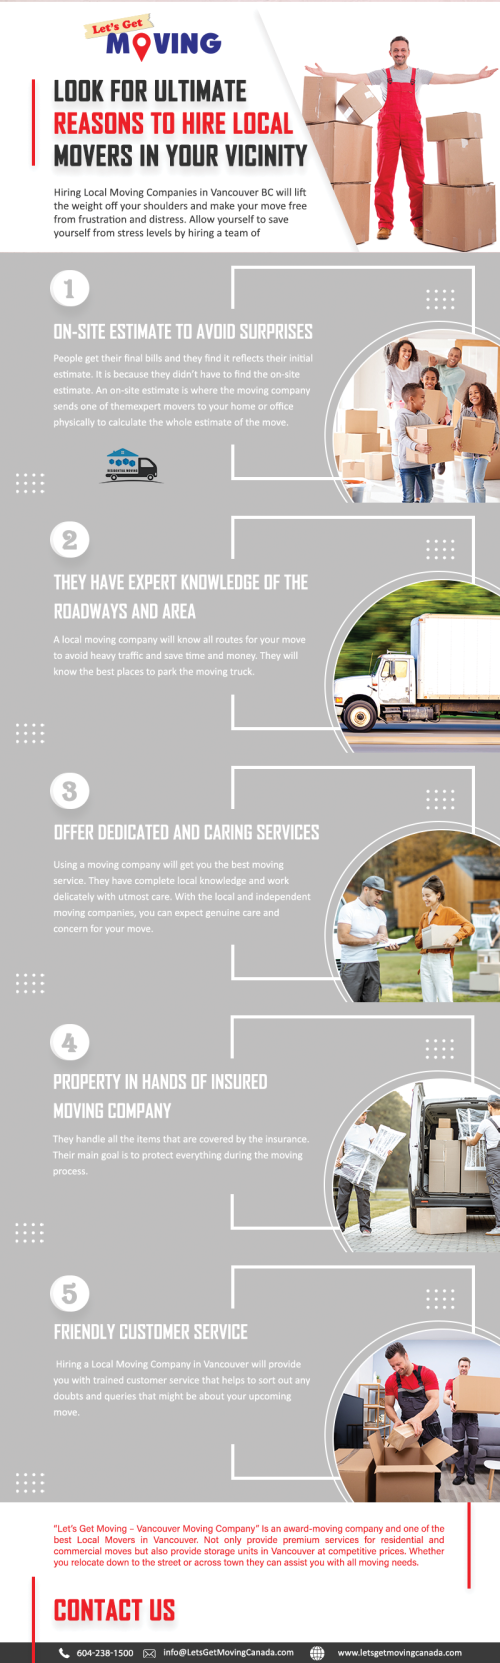 Look-For-Ultimate-Reasons-To-Hire-Local-Movers-In-Your-Vicinity.png